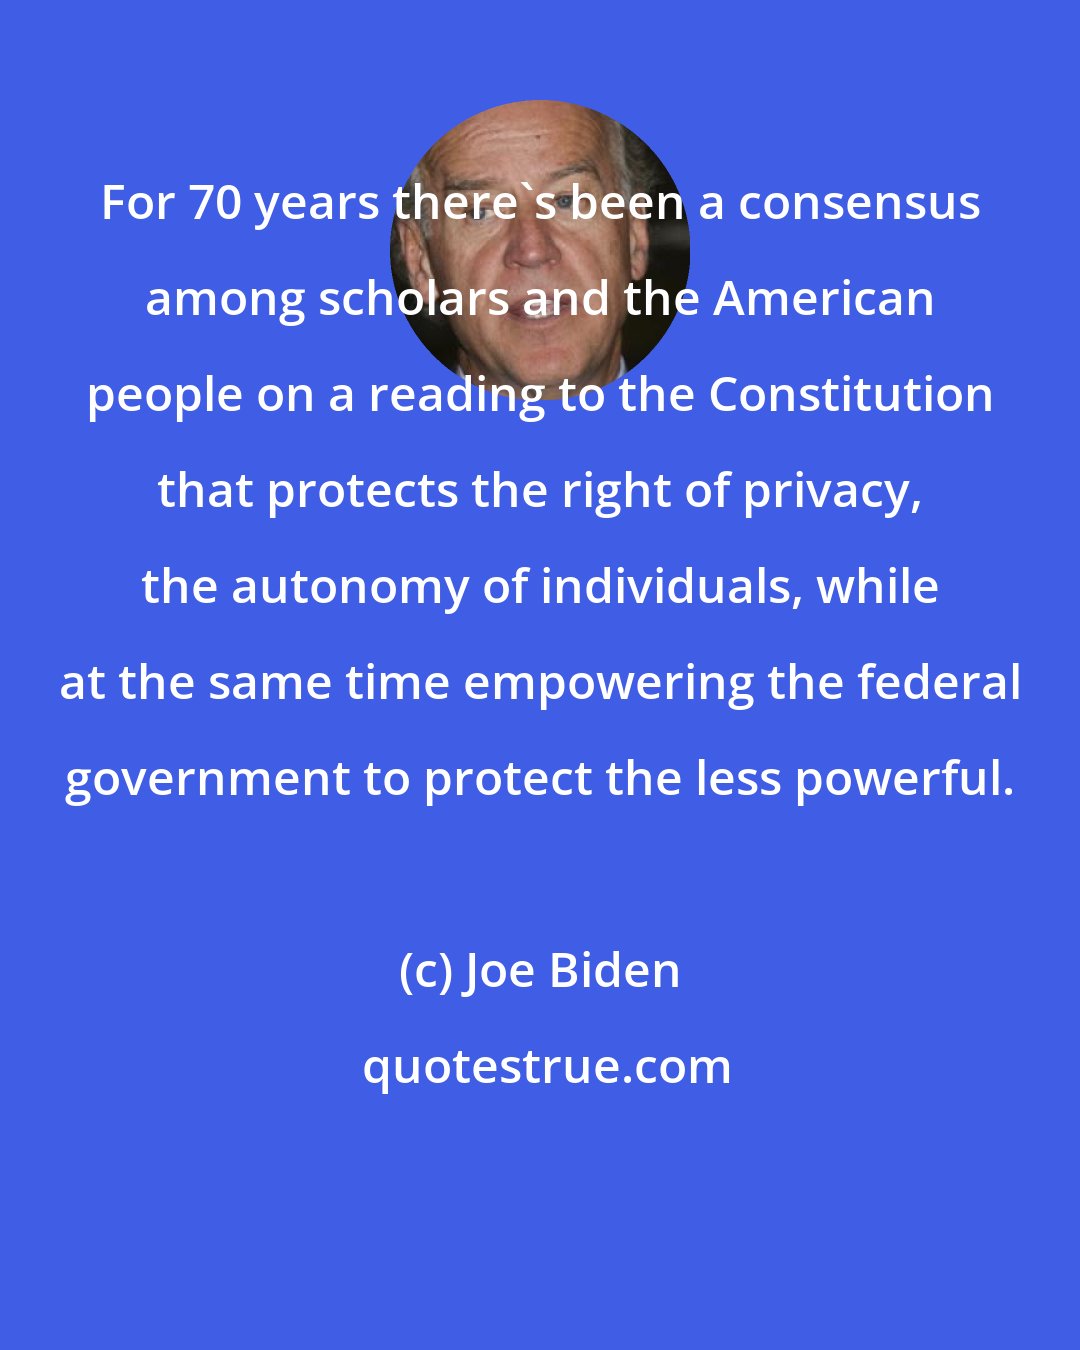 Joe Biden: For 70 years there's been a consensus among scholars and the American people on a reading to the Constitution that protects the right of privacy, the autonomy of individuals, while at the same time empowering the federal government to protect the less powerful.